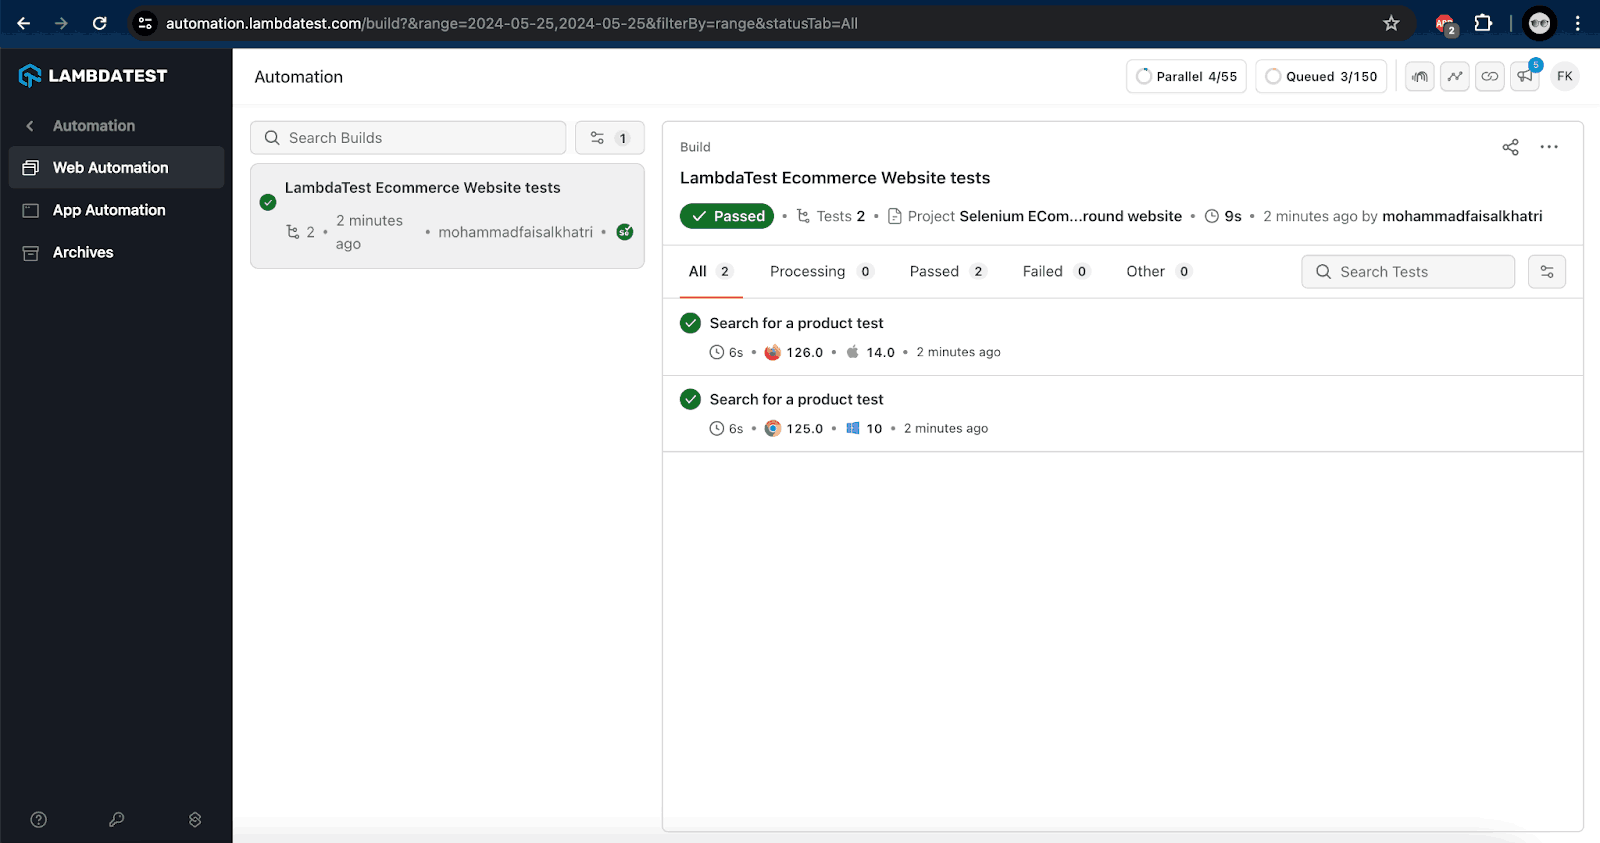  test execution can be found on the LambdaTest Web Automation